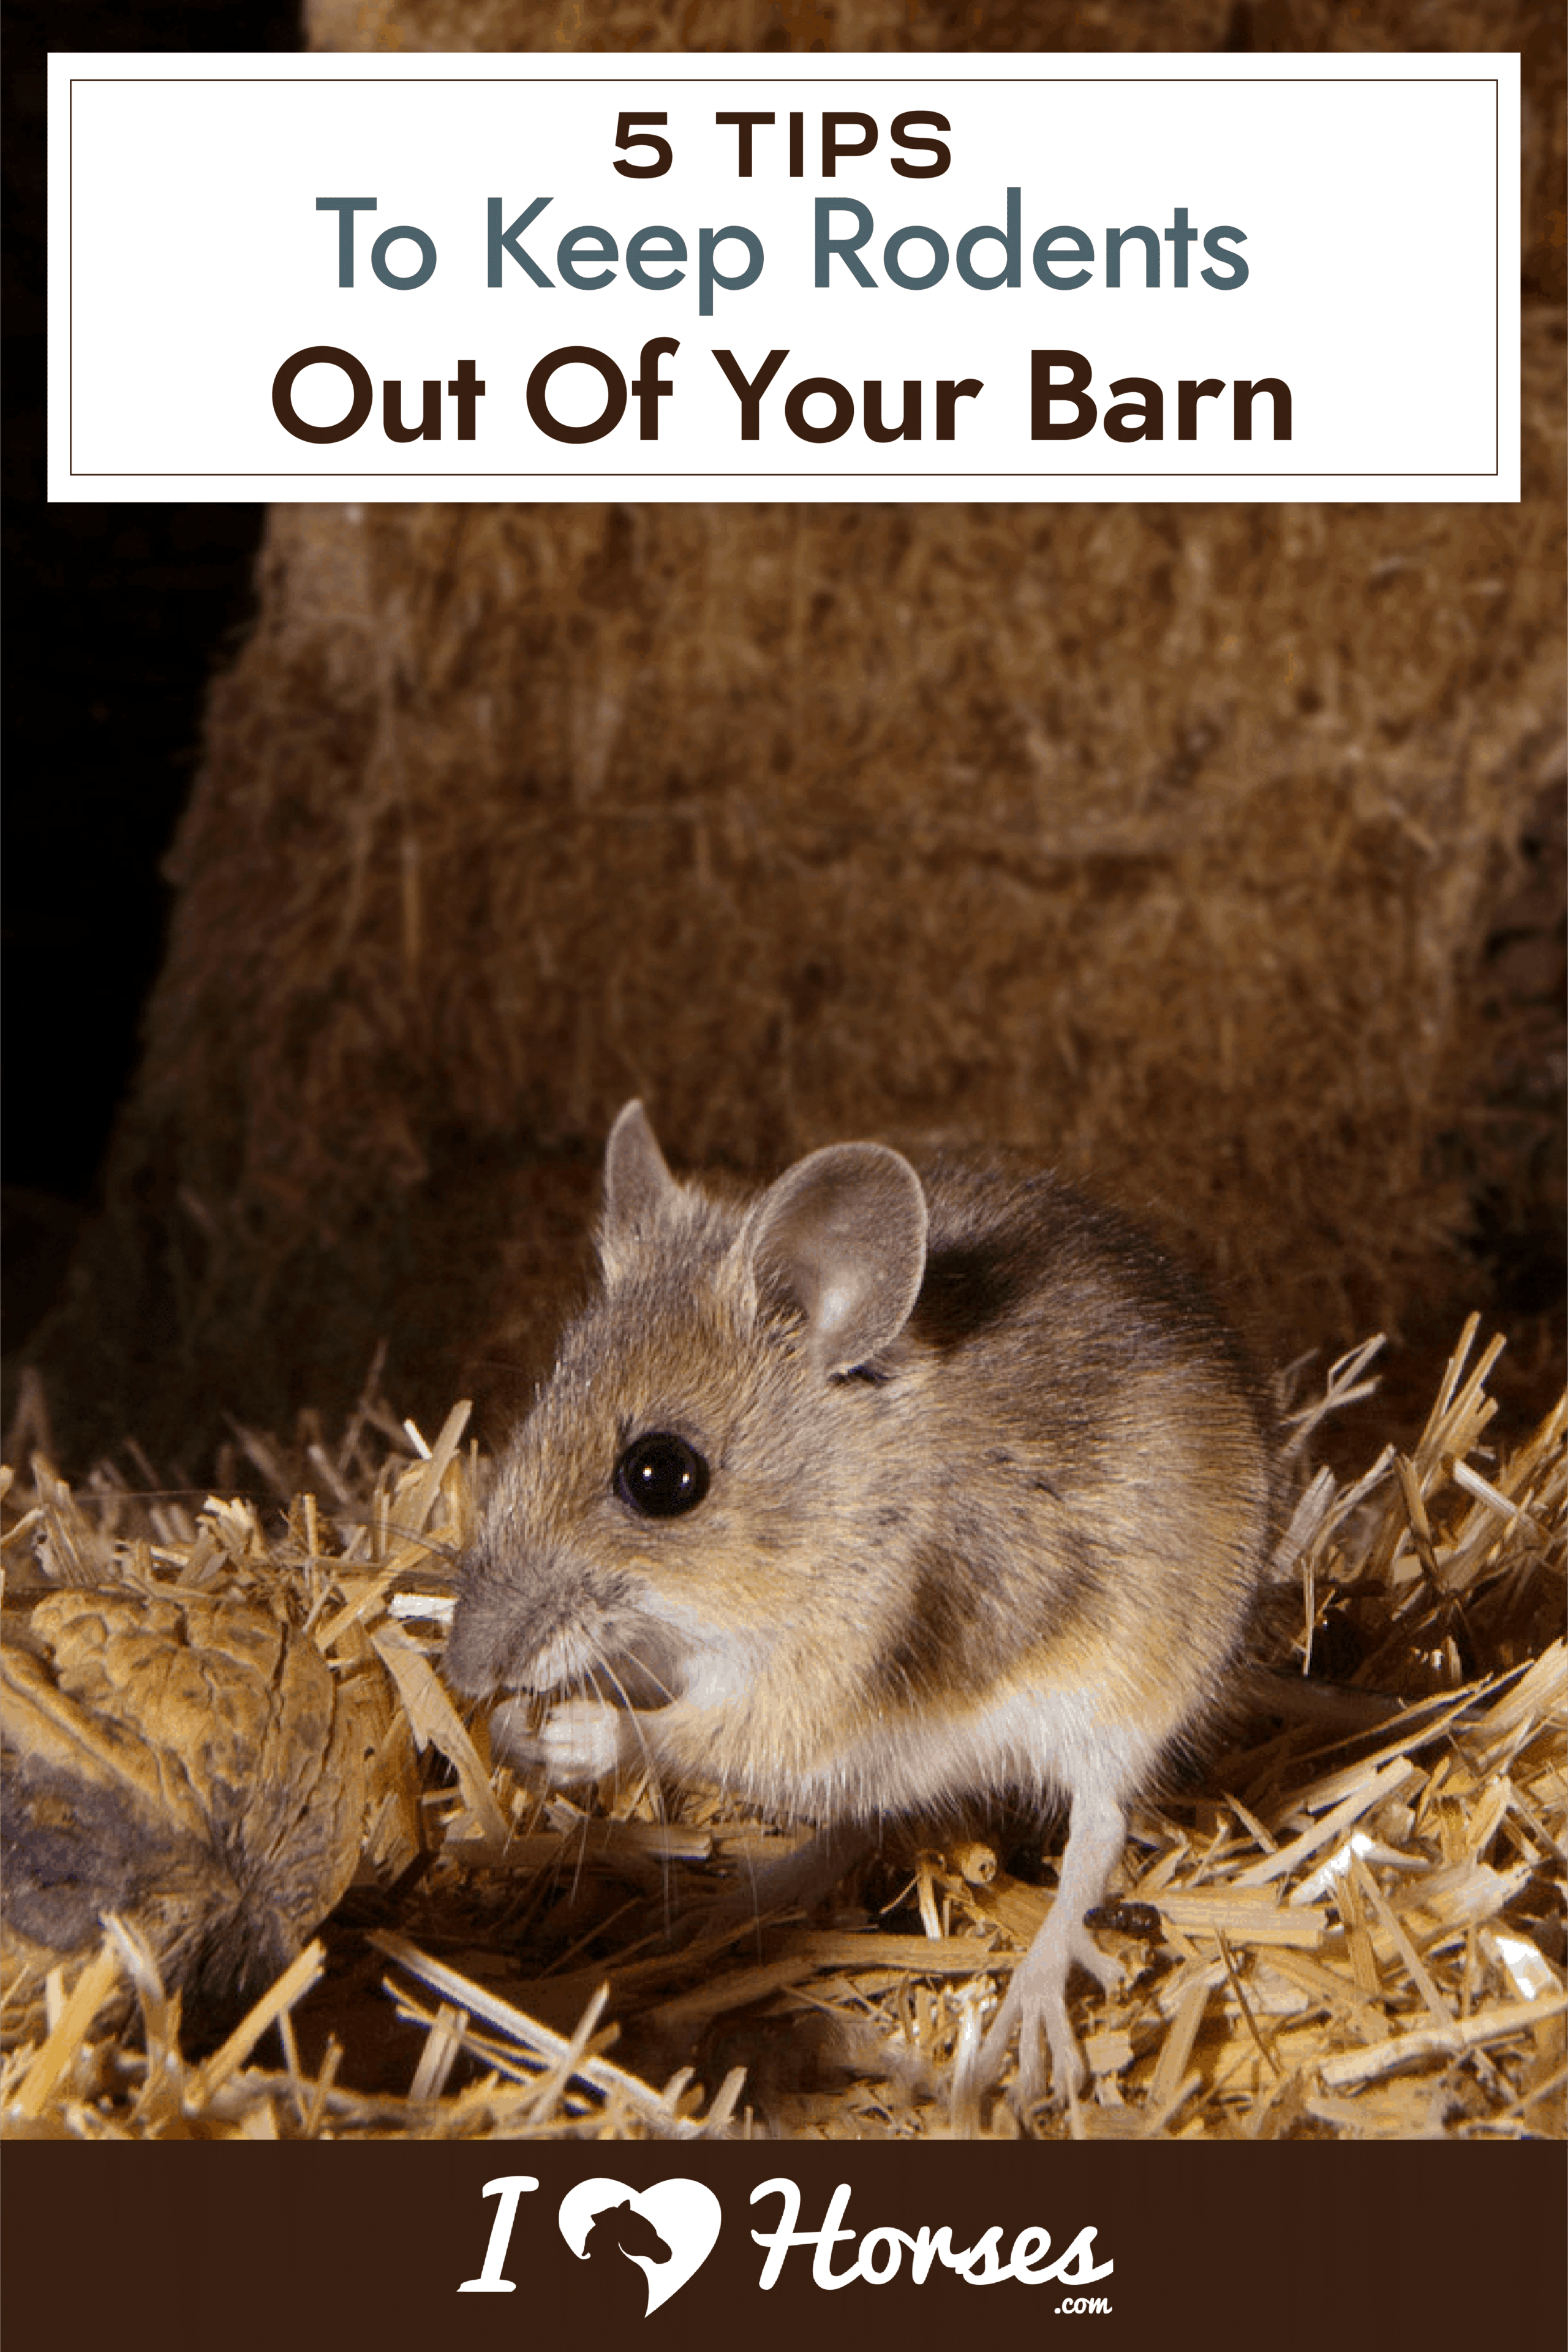 rodent in hay, rodent in barn, keep rodents out of barn